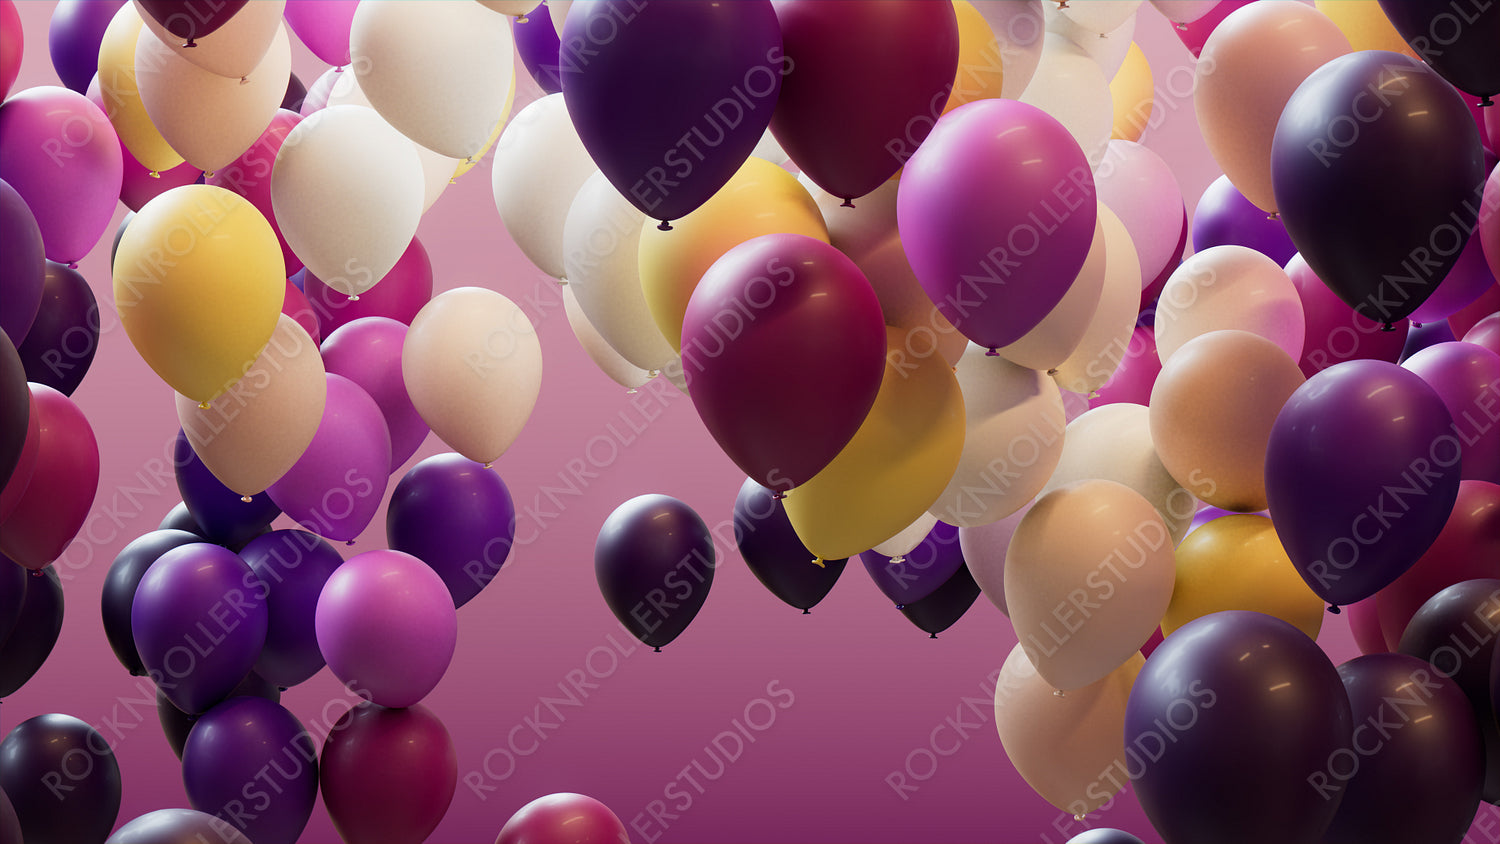 Colorful Party Balloons in Purple, Yellow and White. Youthful Background.